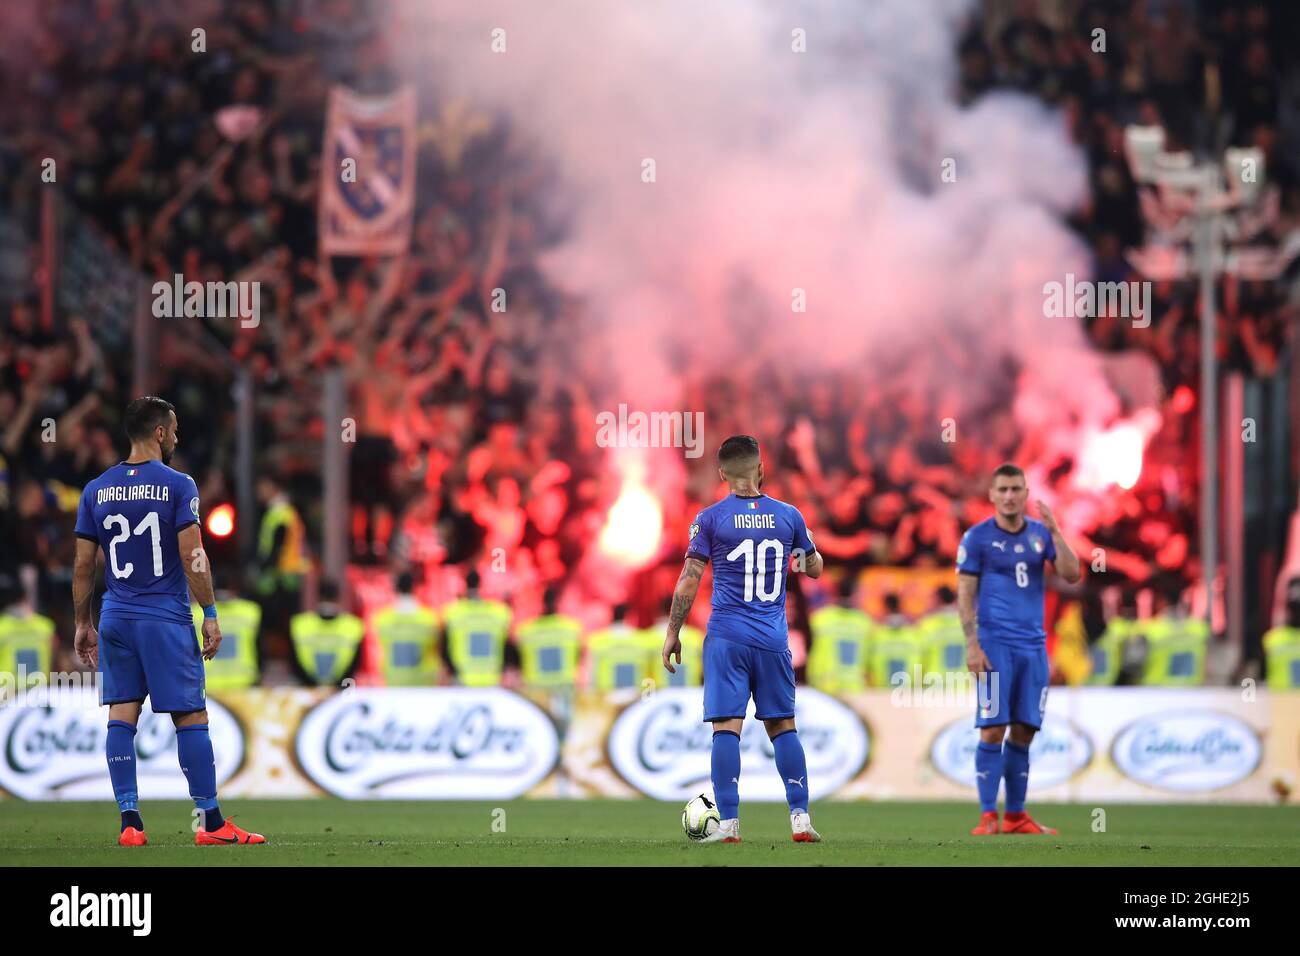 Fabio Quagliarella and Lorenzo Insigne of Italy wait to restart the match  as Marco Verratti looks on after Bosnia fans lit flares and celebrate  following Edin Dzeko's goal which gave the side